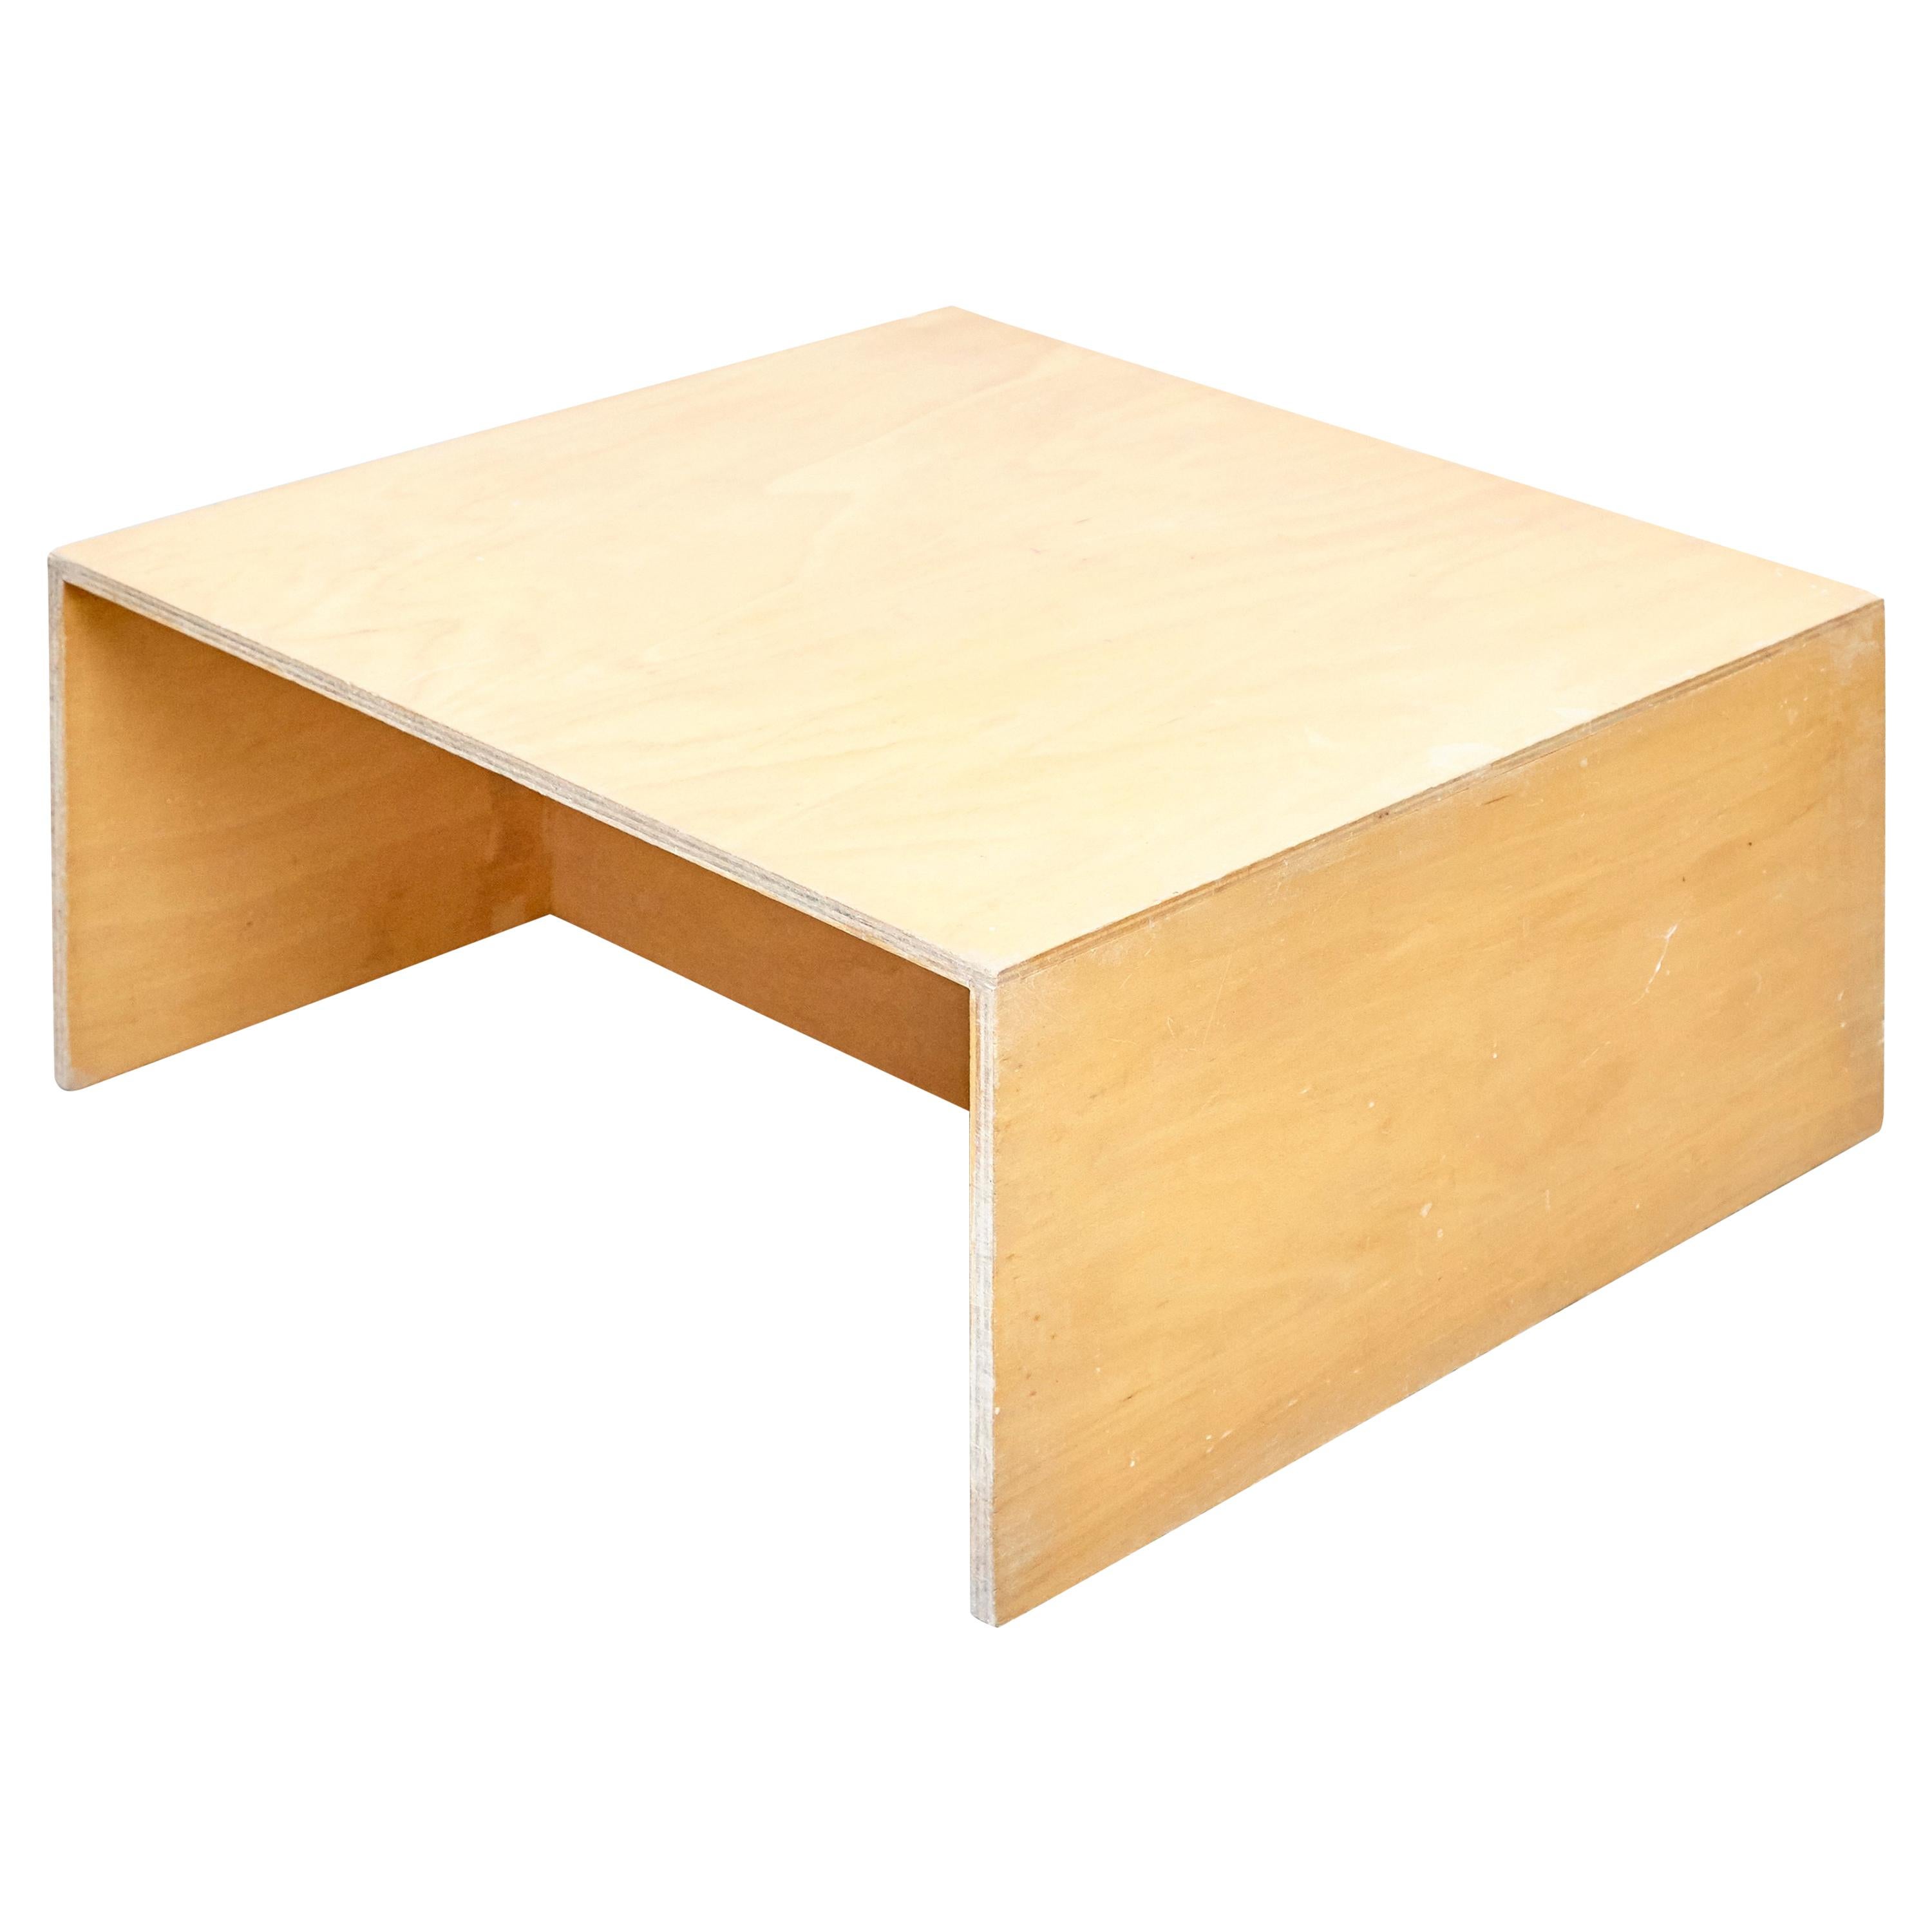 Table in the Style of Donald Judd